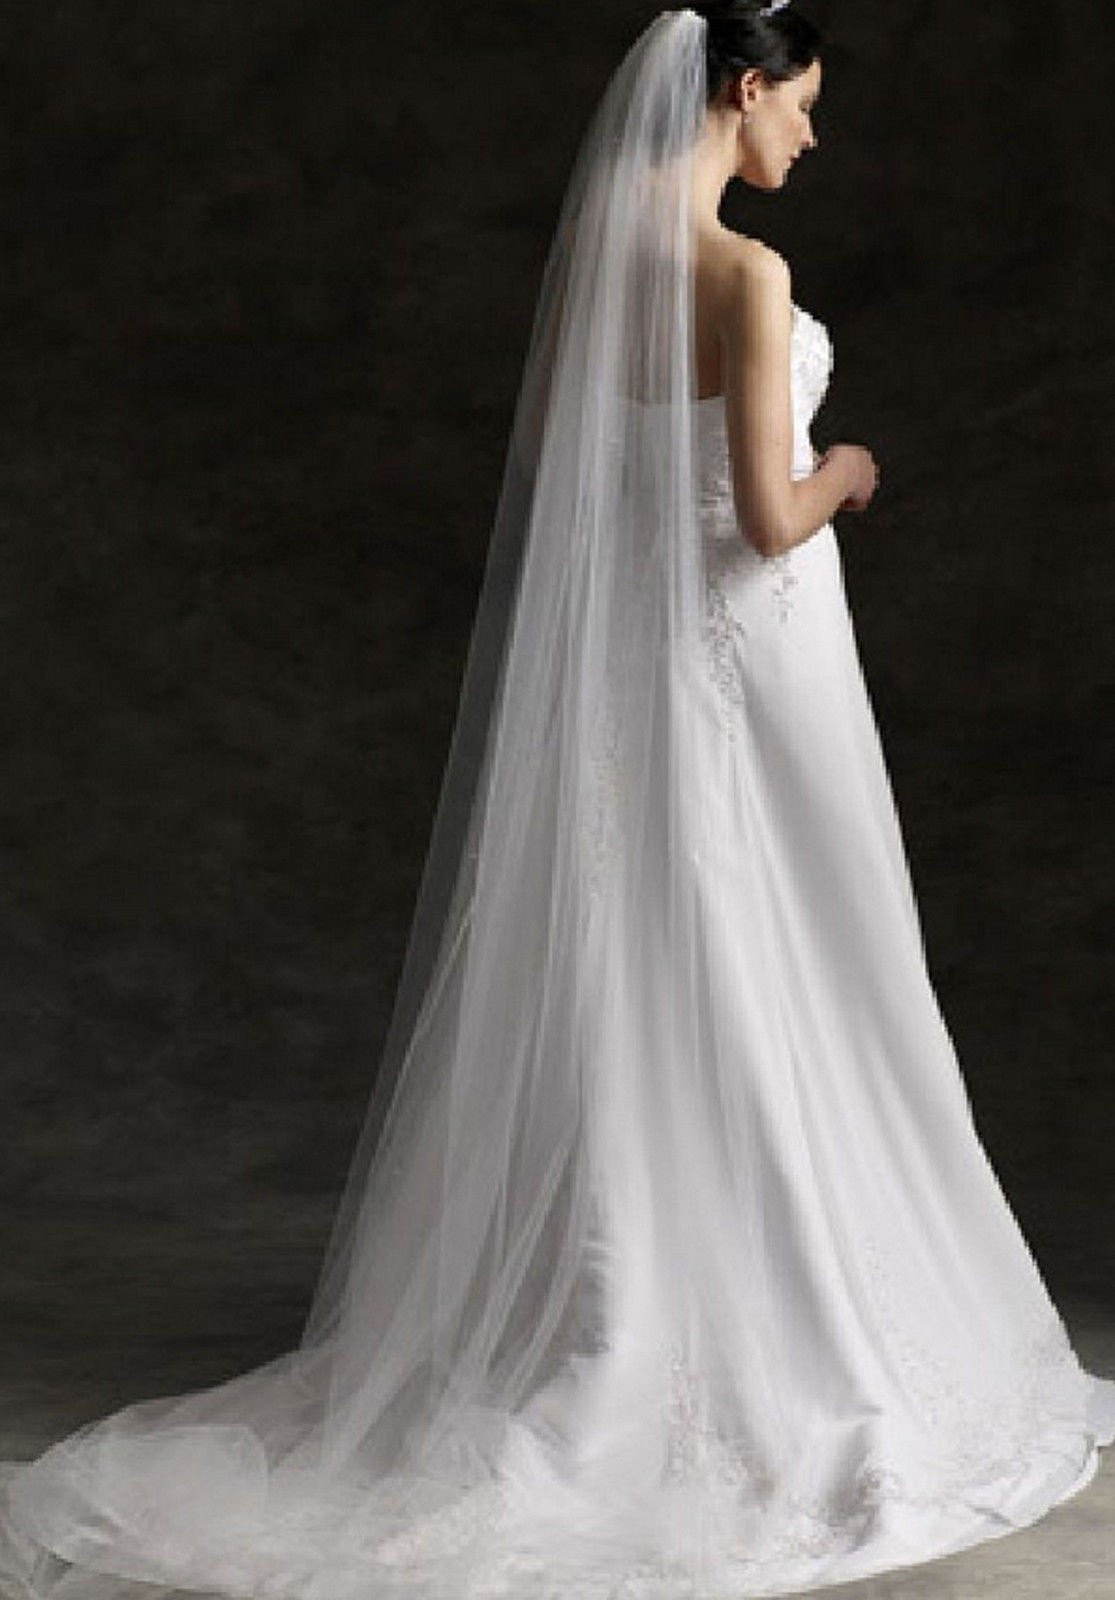 Wedding Veil Cathedral Length
 Plain Single Tier Cathedral Length Tulle Veil With Raw